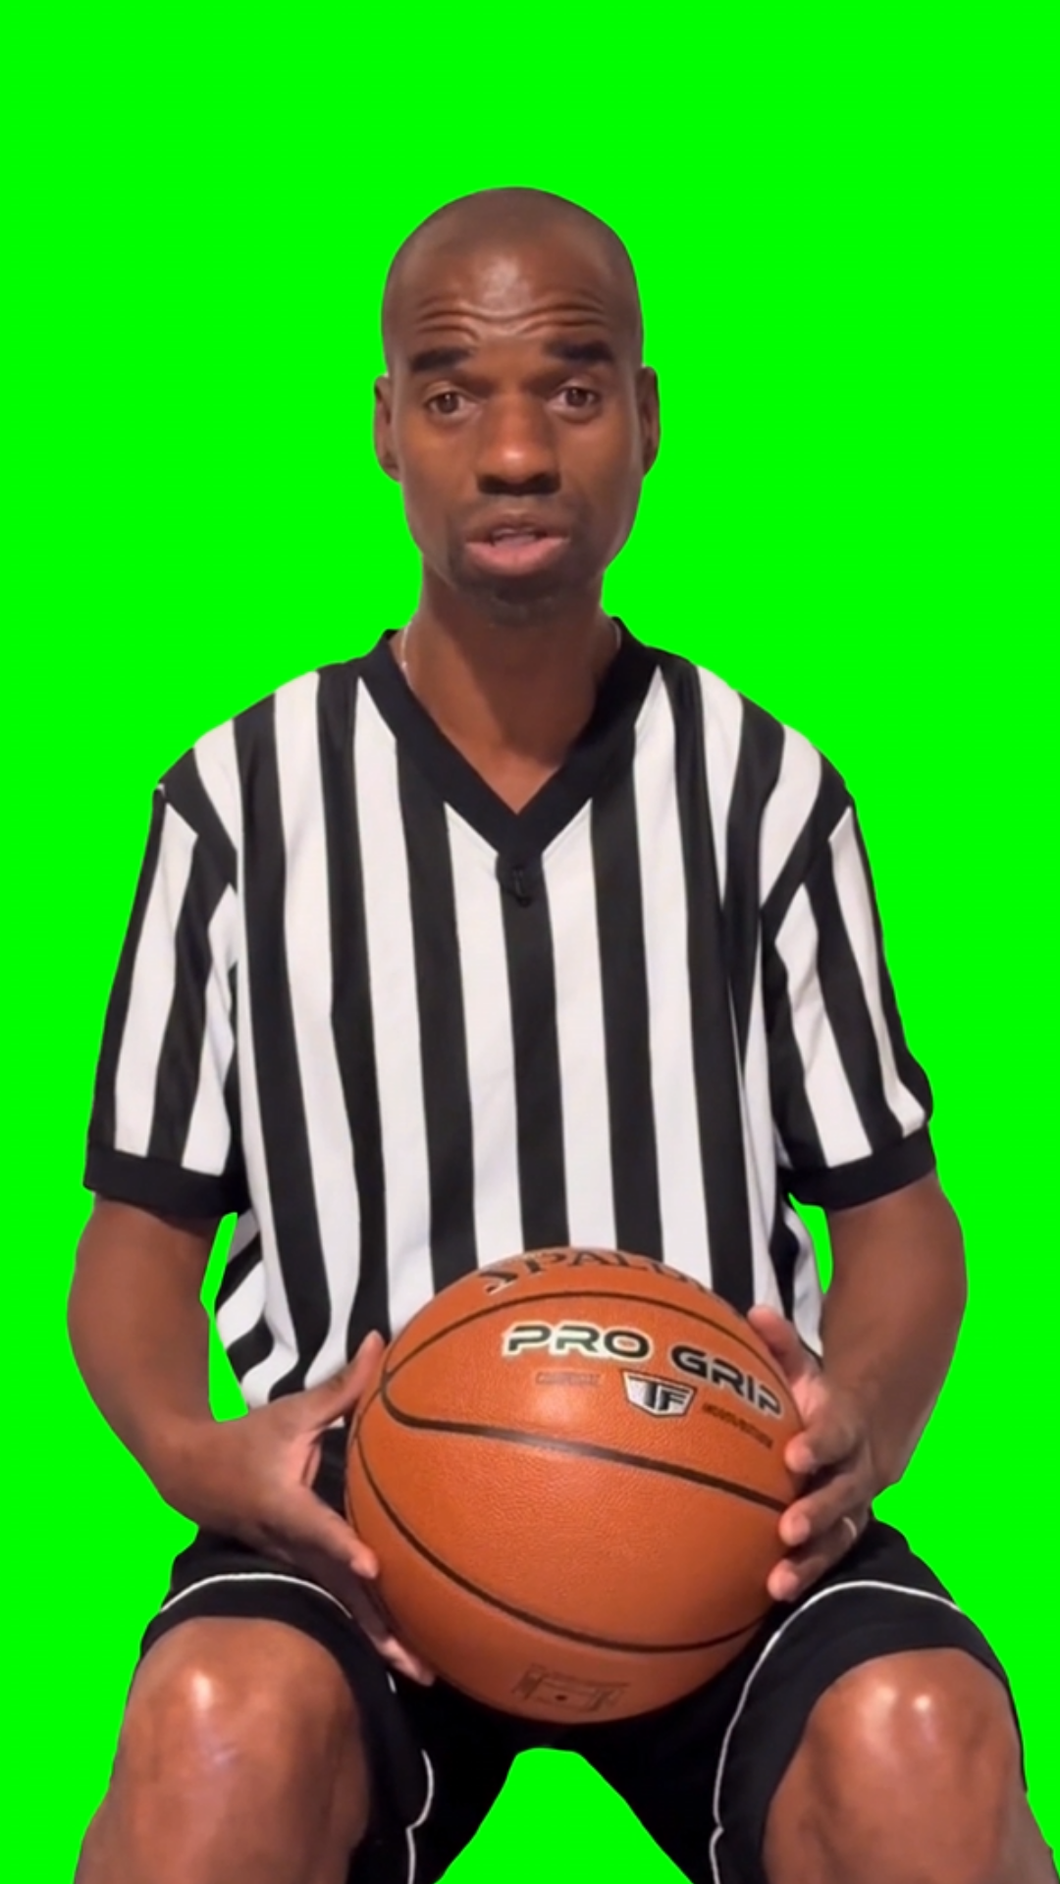 Omar The Referee is alive - Basketball Catching Referee (Green Screen)